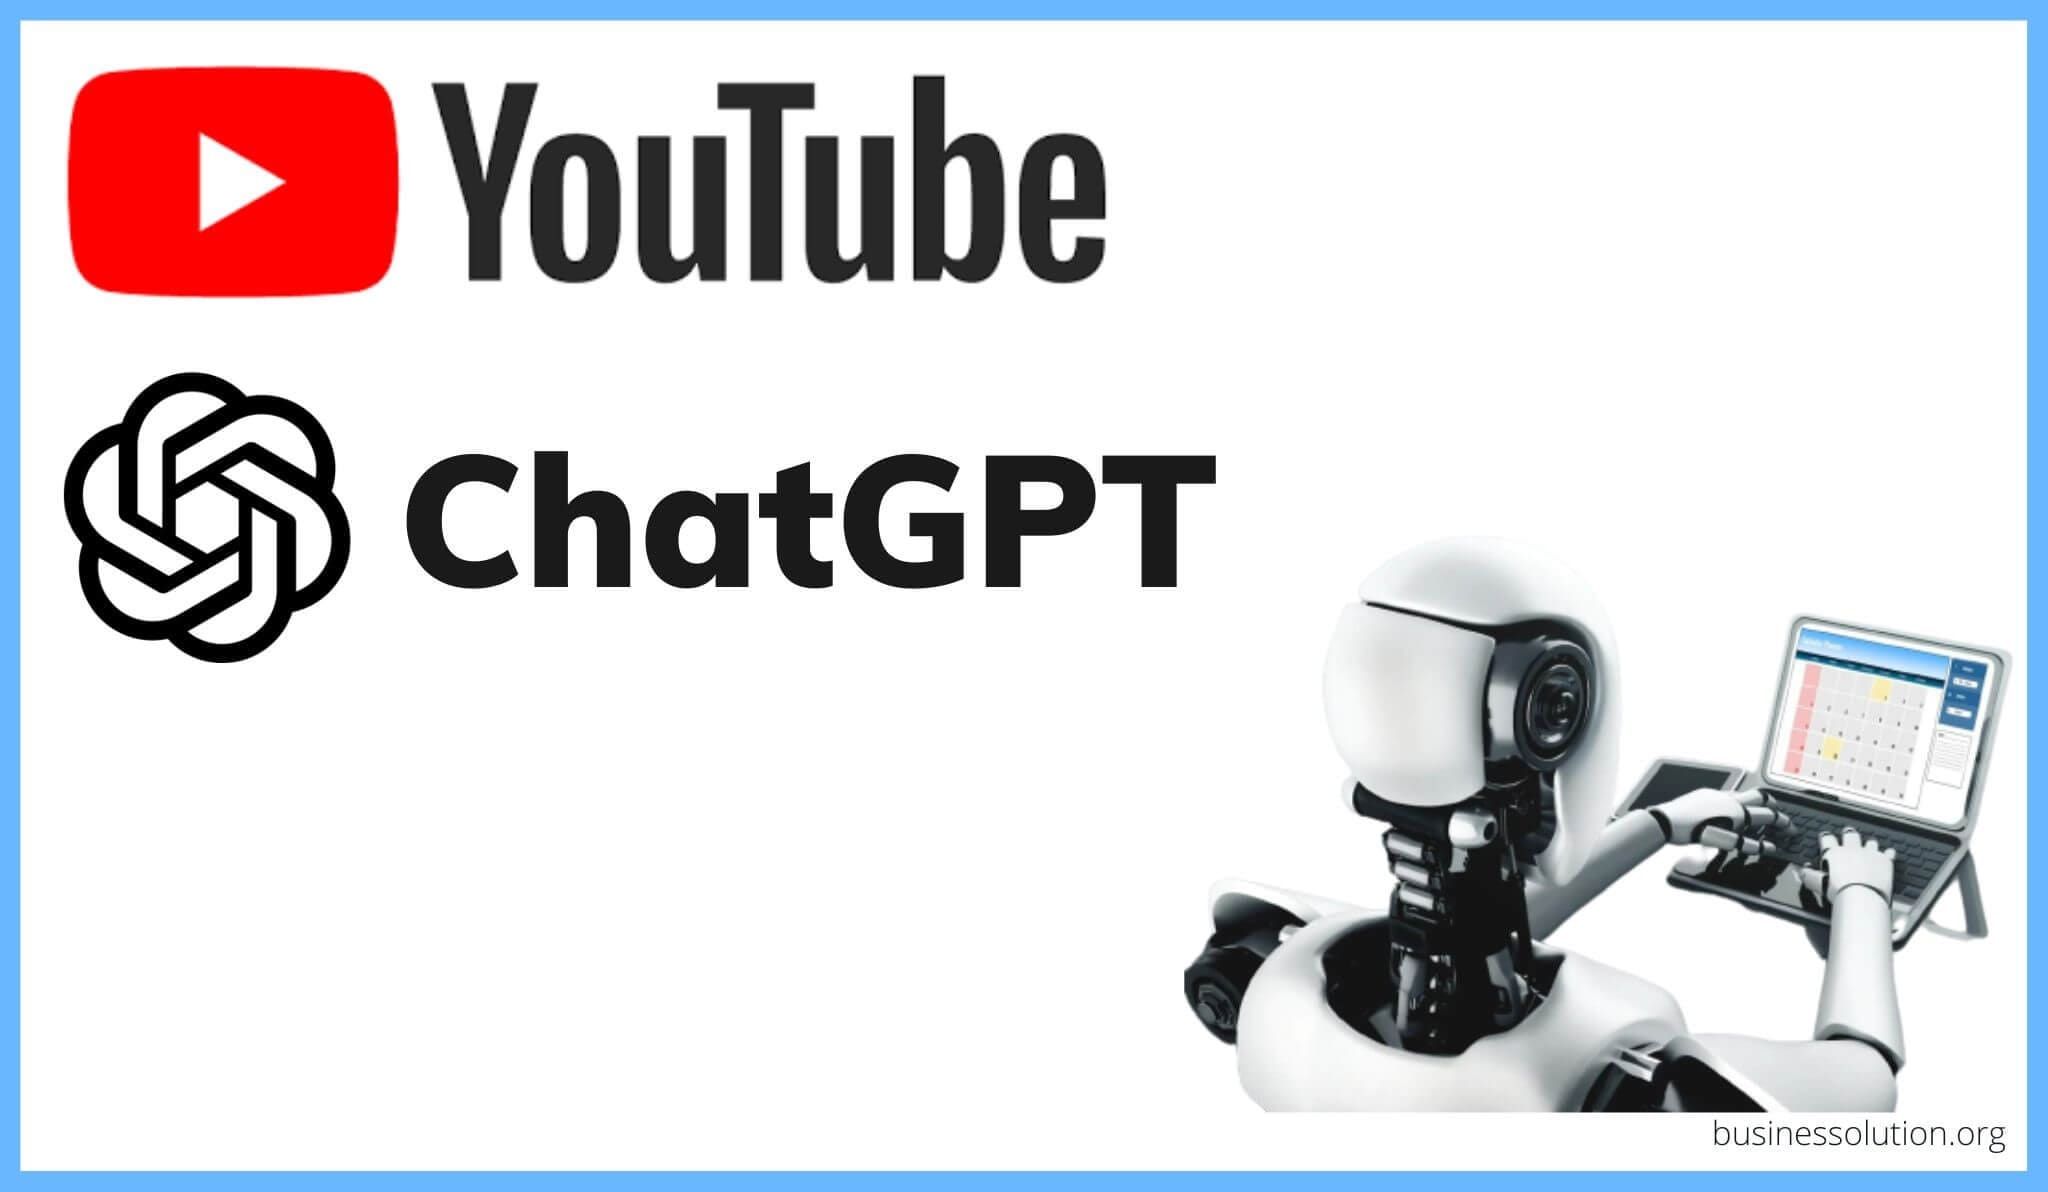 chatgpt and youtube